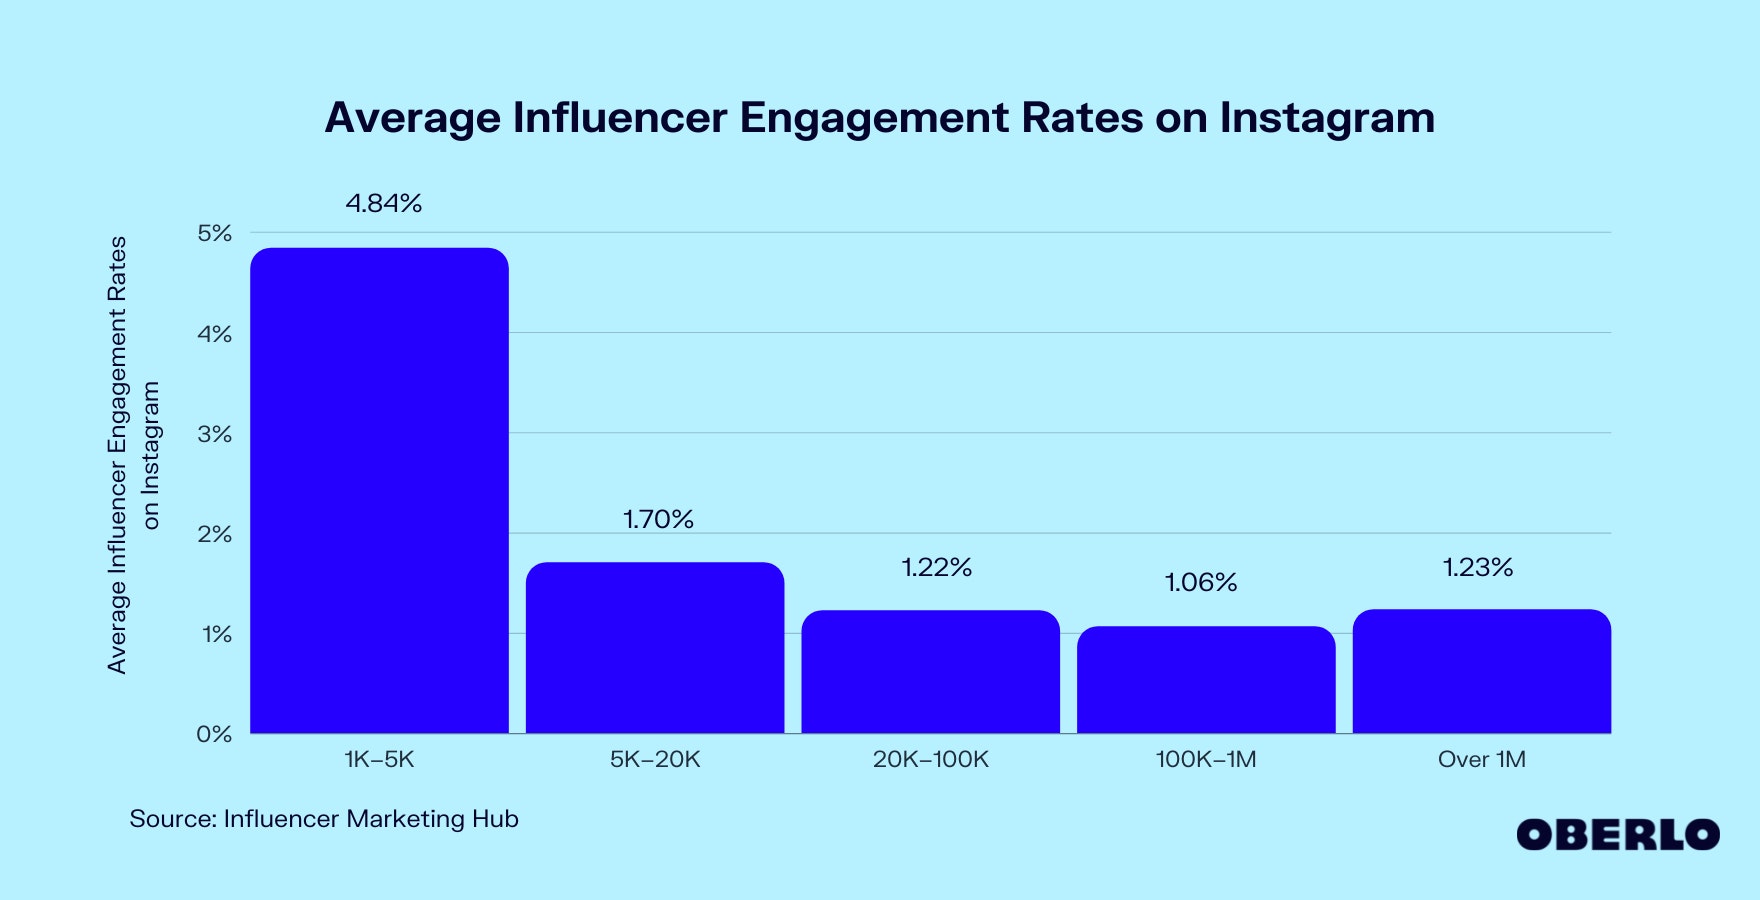 What is a Good Engagement Rate for Instagram Influencer?